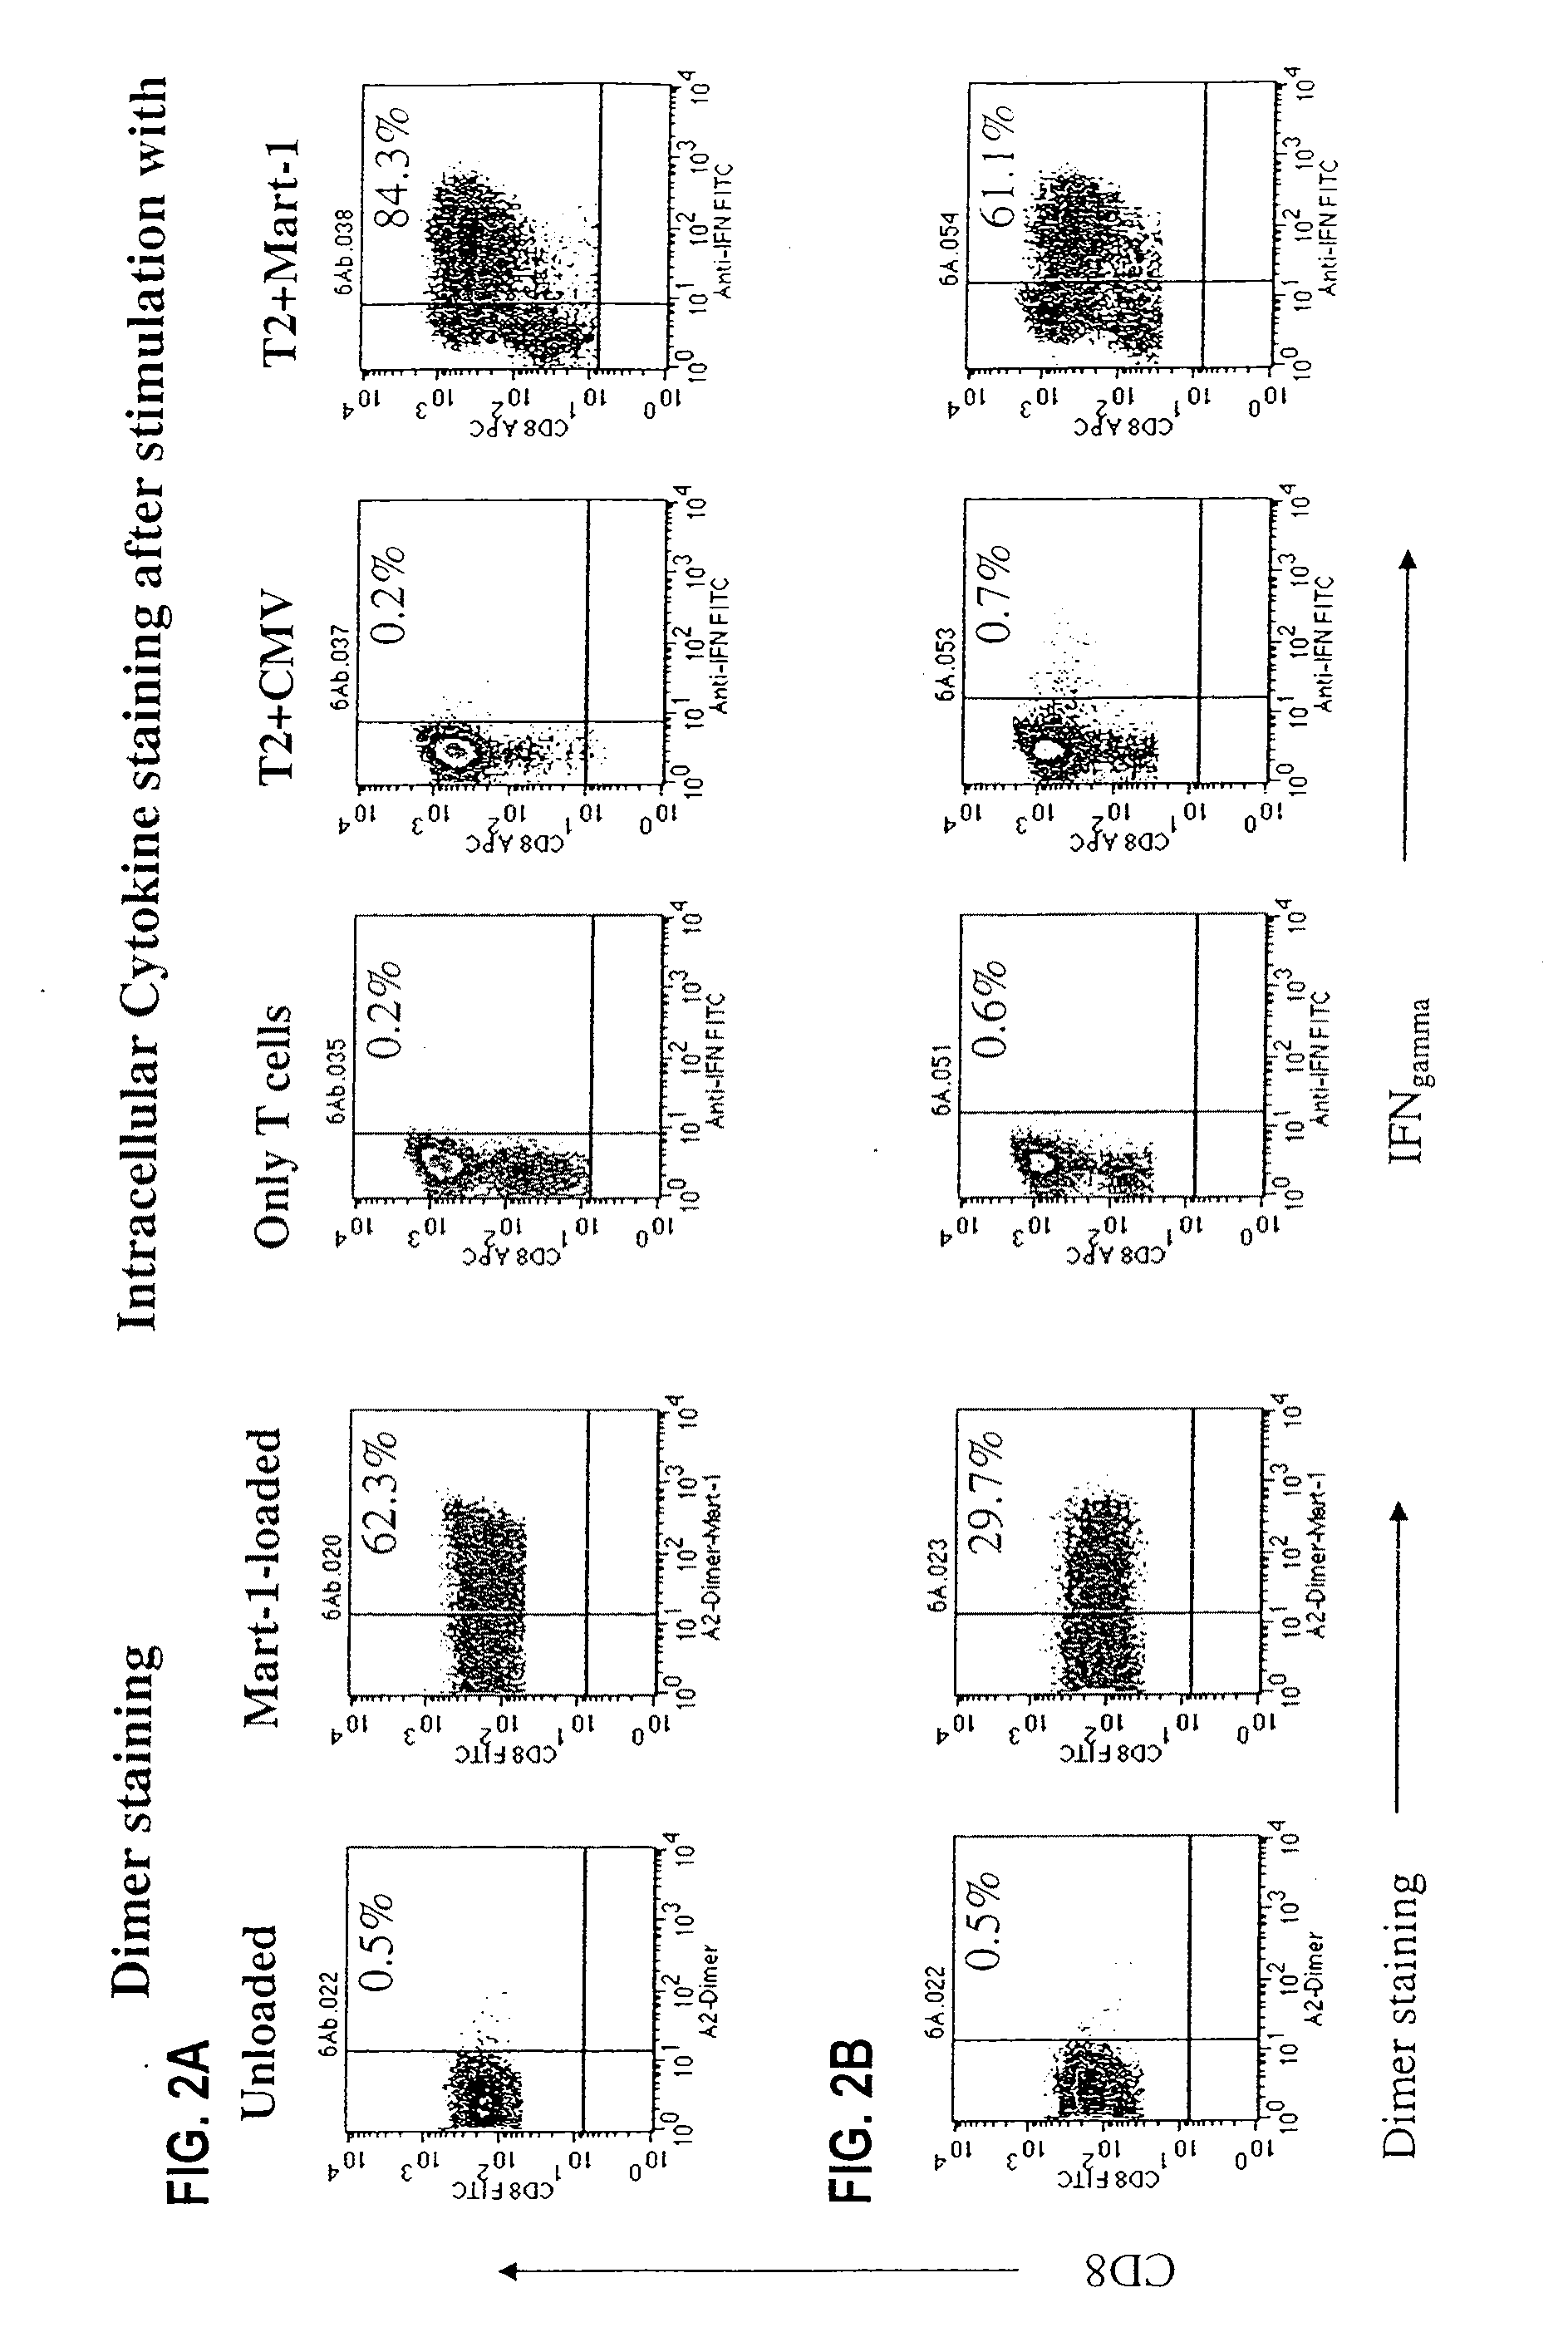 Reagents and Methods for Engaging Unique Clonotypic Lymphocyte Receptors